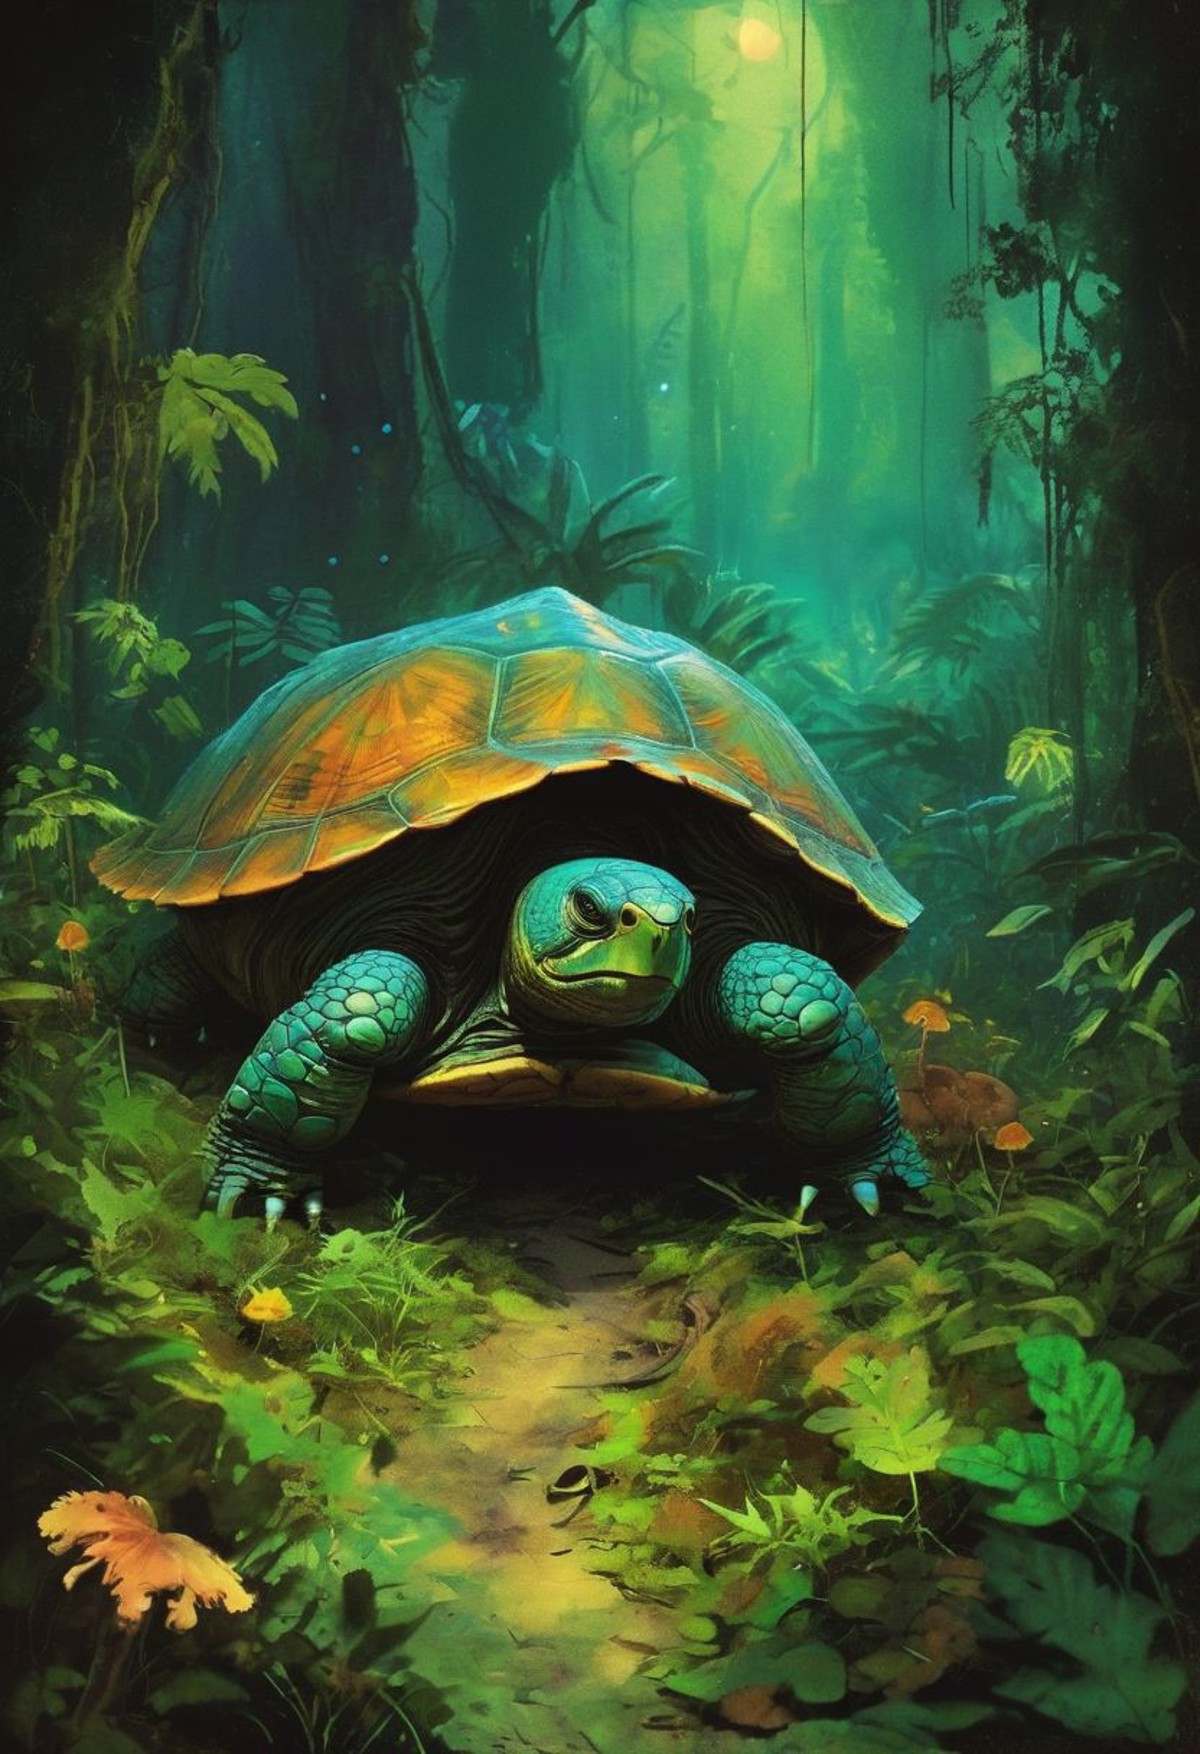 A vast, overgrown jungle where a giant turtle makes its way through the dense foliage. The turtle's massive shell is a min...